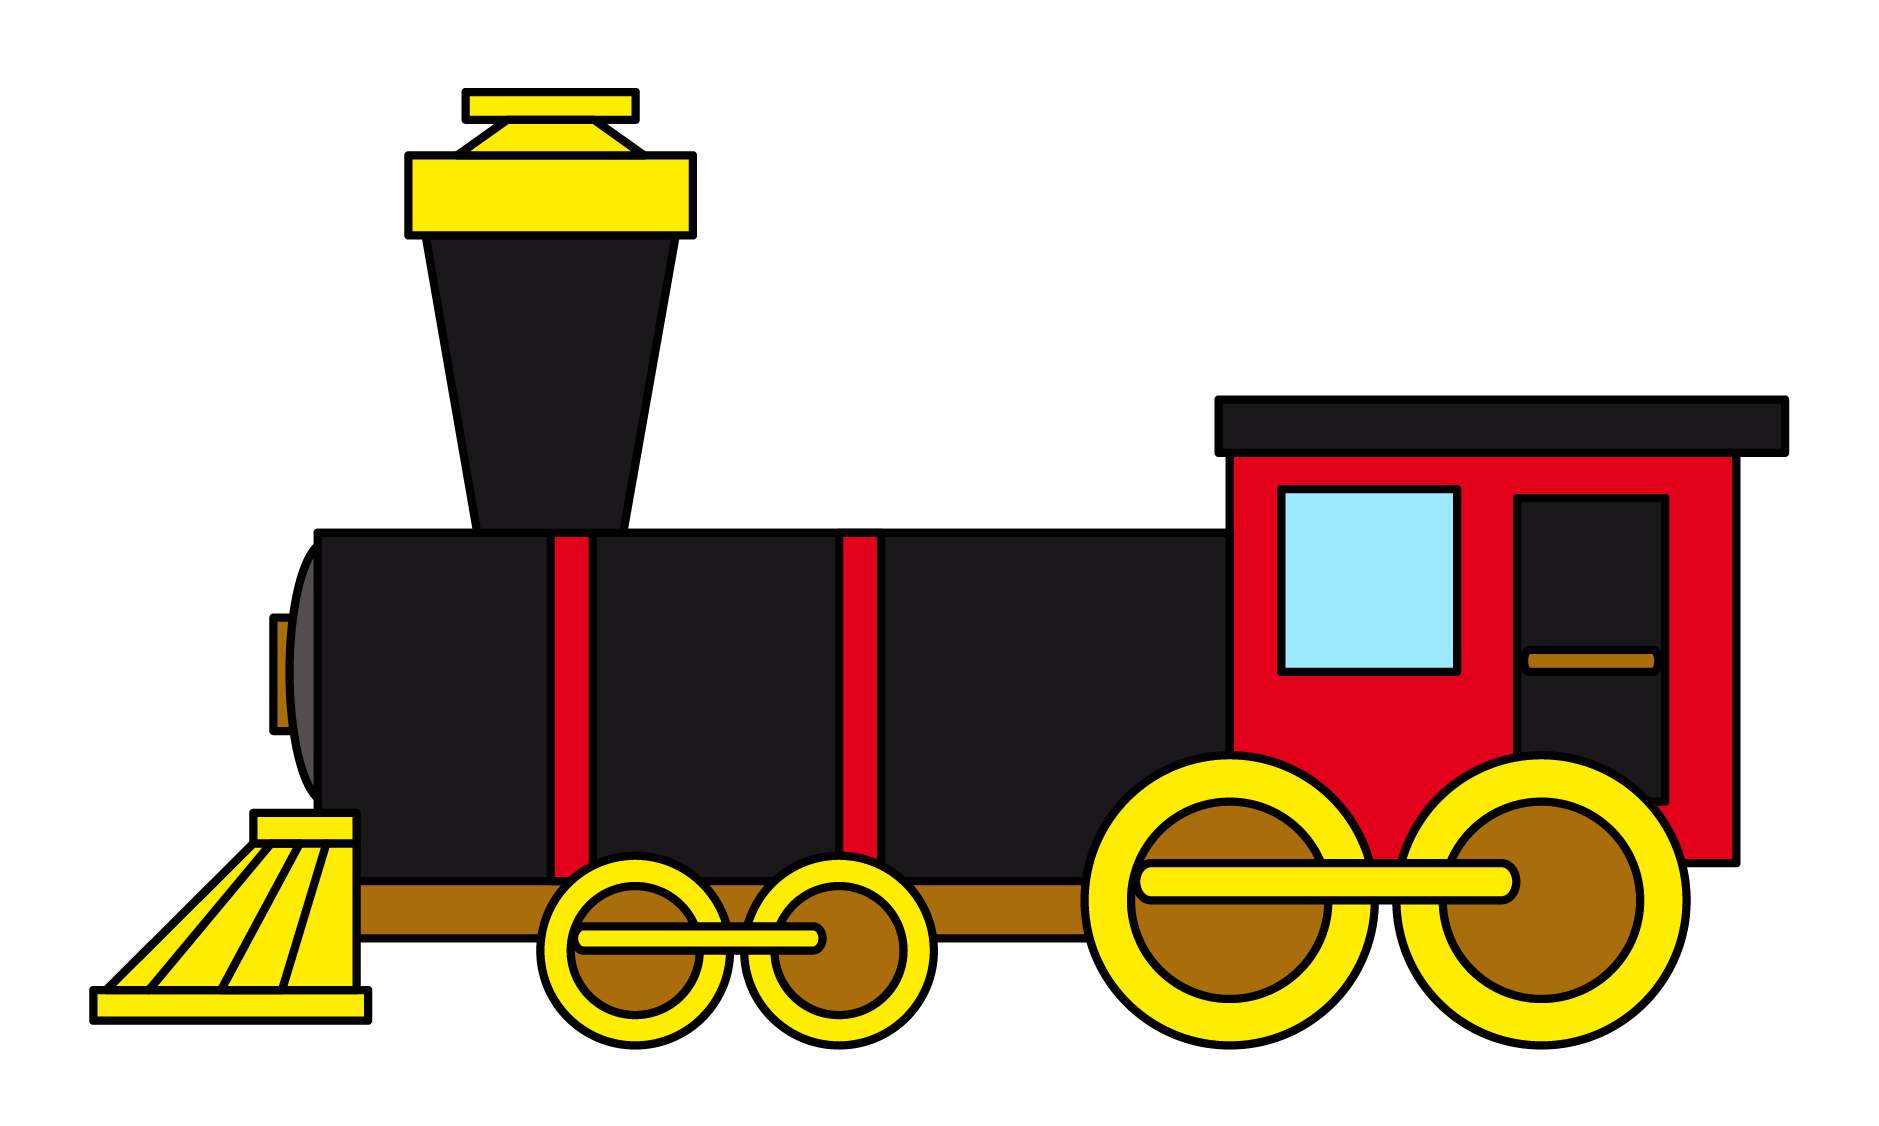 Red Engine PNG, Vector, PSD, and Clipart With Transparent